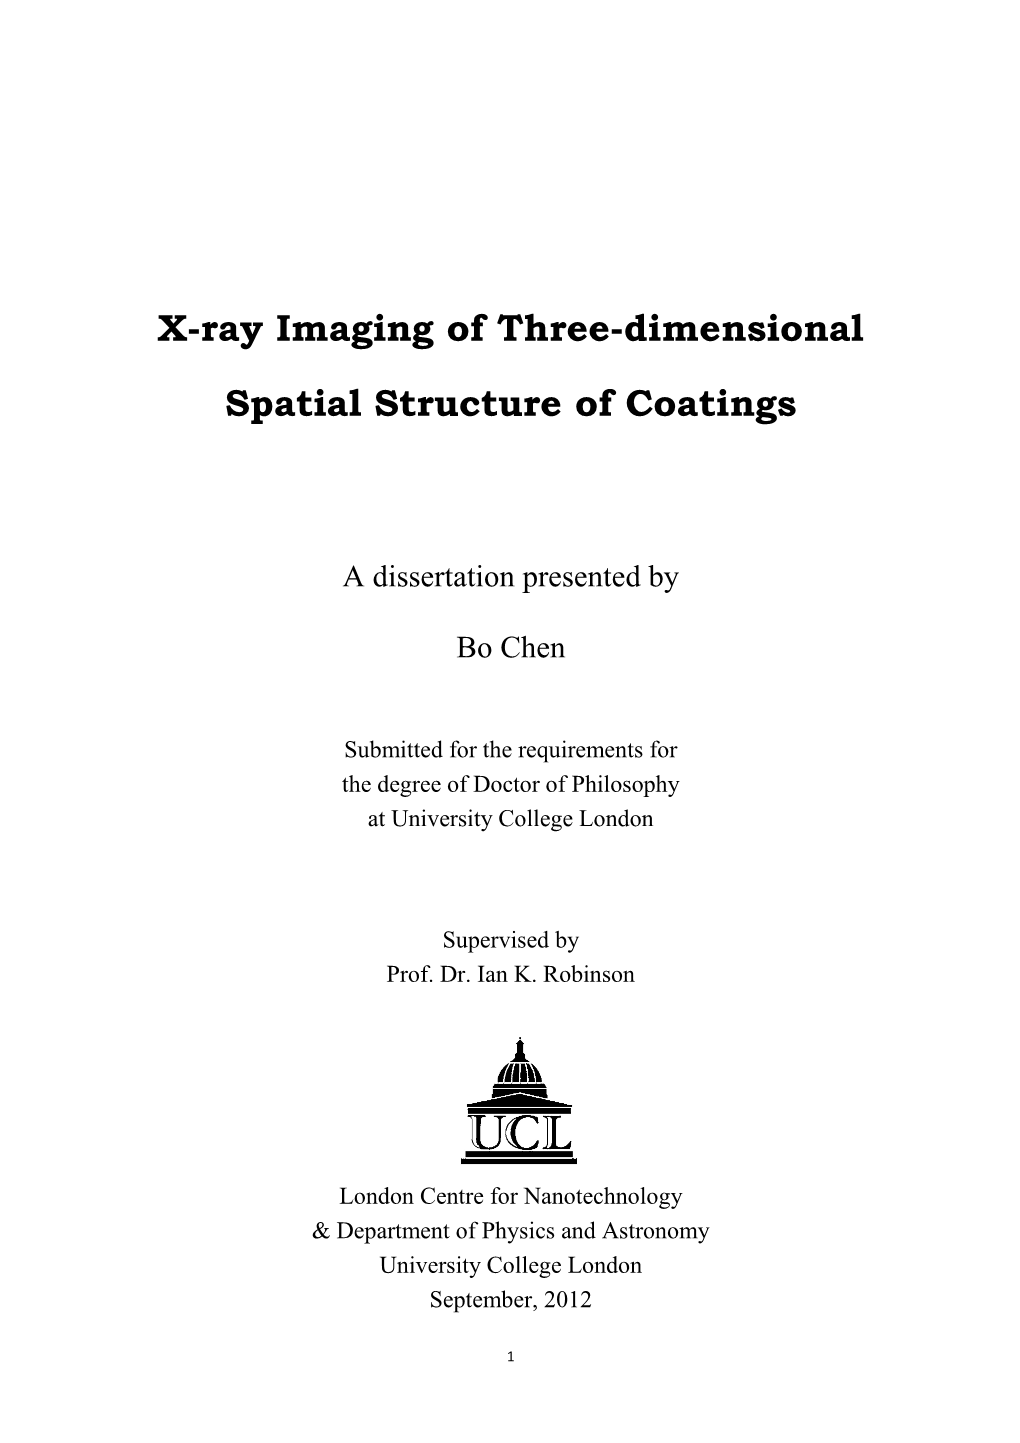 X-Ray Imaging of Three-Dimensional Spatial Structure of Coatings